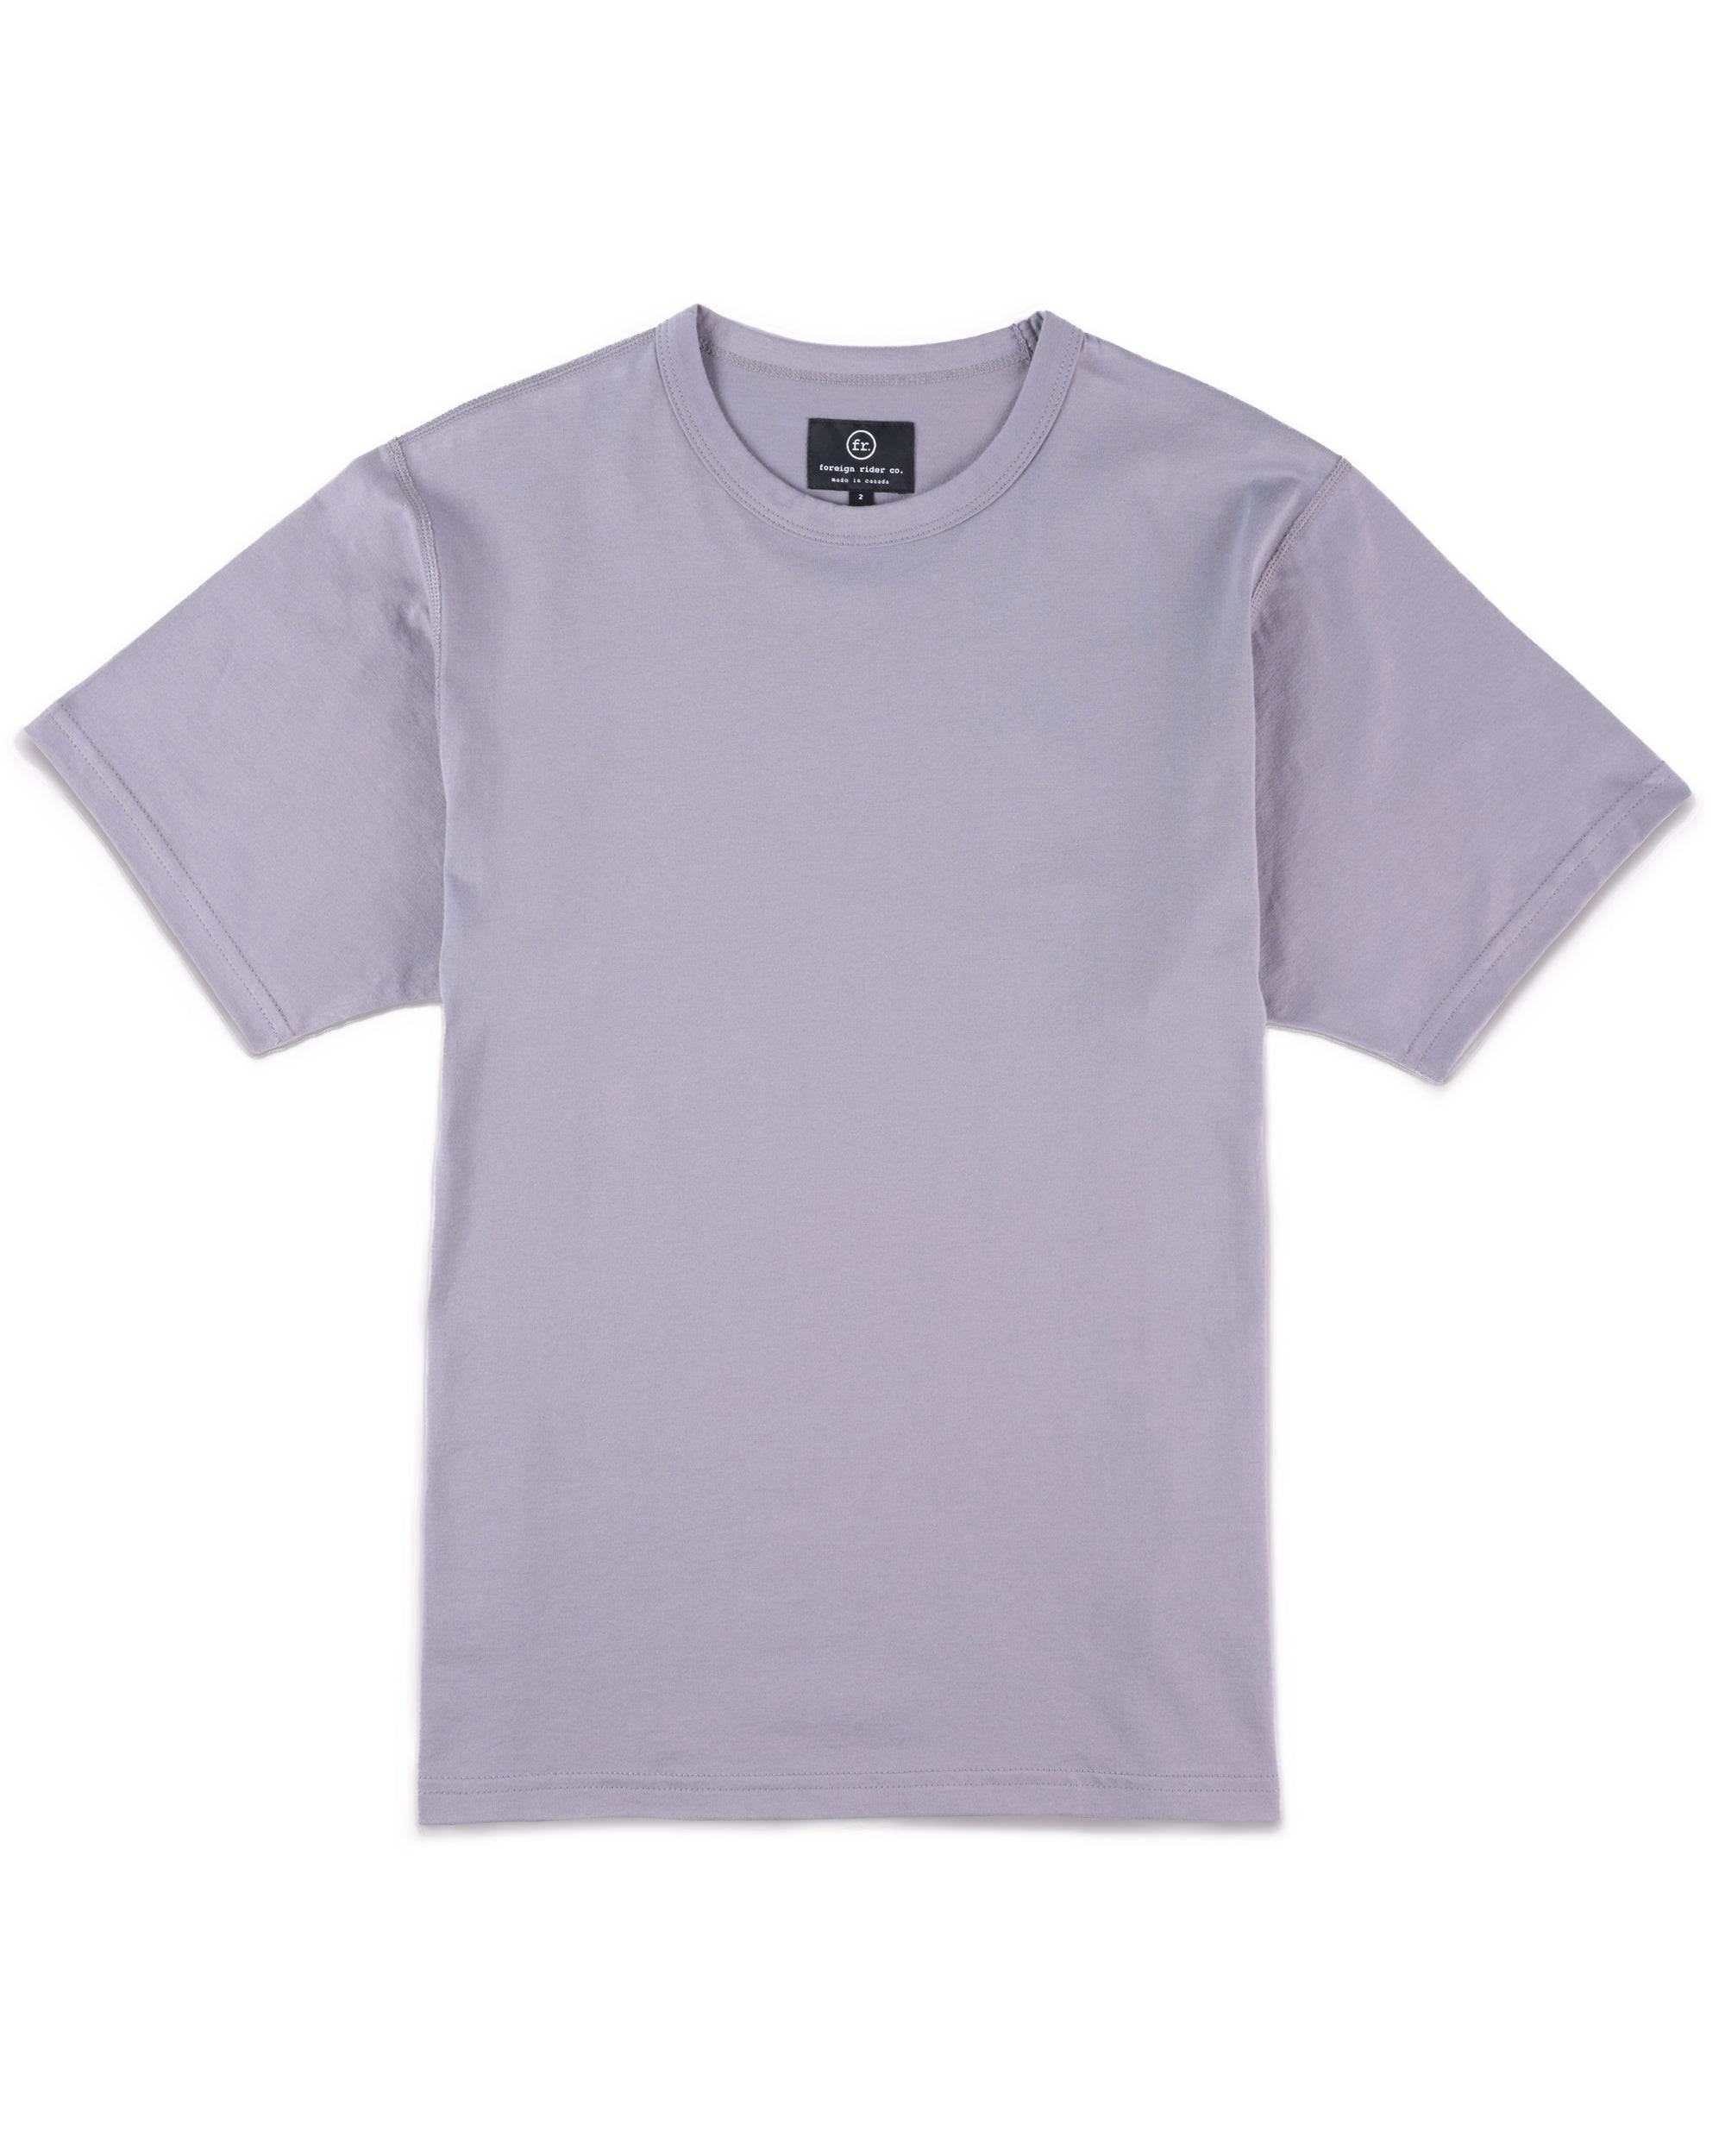 Supima SS T-Shirt Grey - Foreign Rider Co.